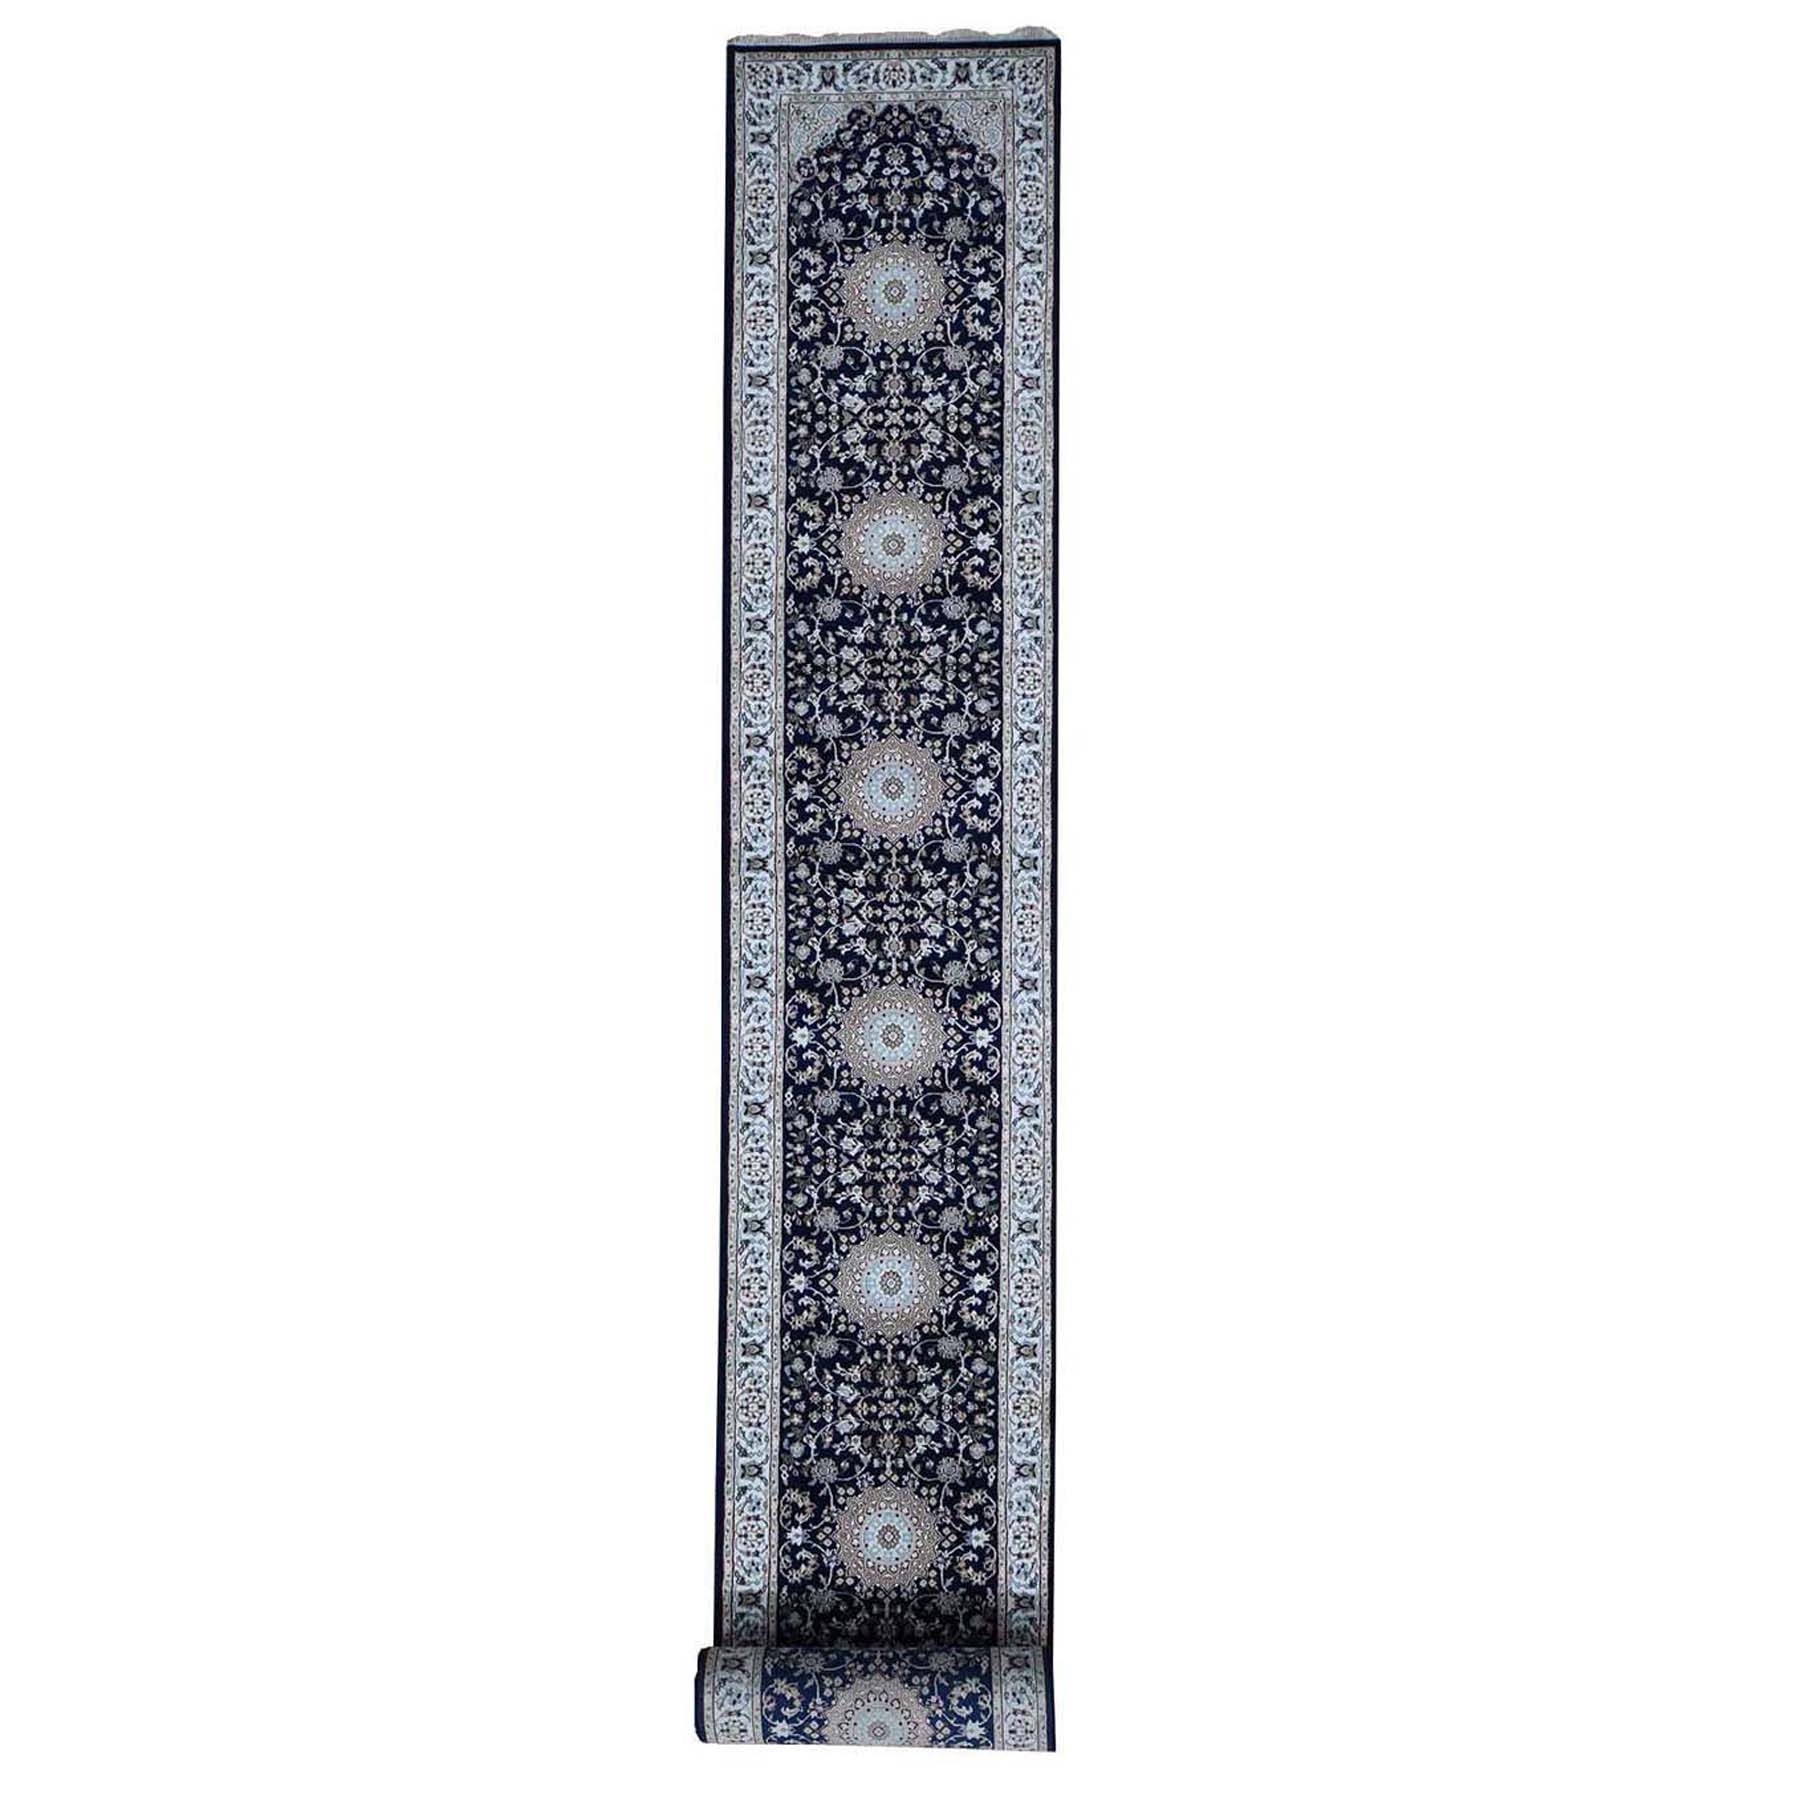 Pirniakan Collection Hand Knotted Blue Rug No: 1132456